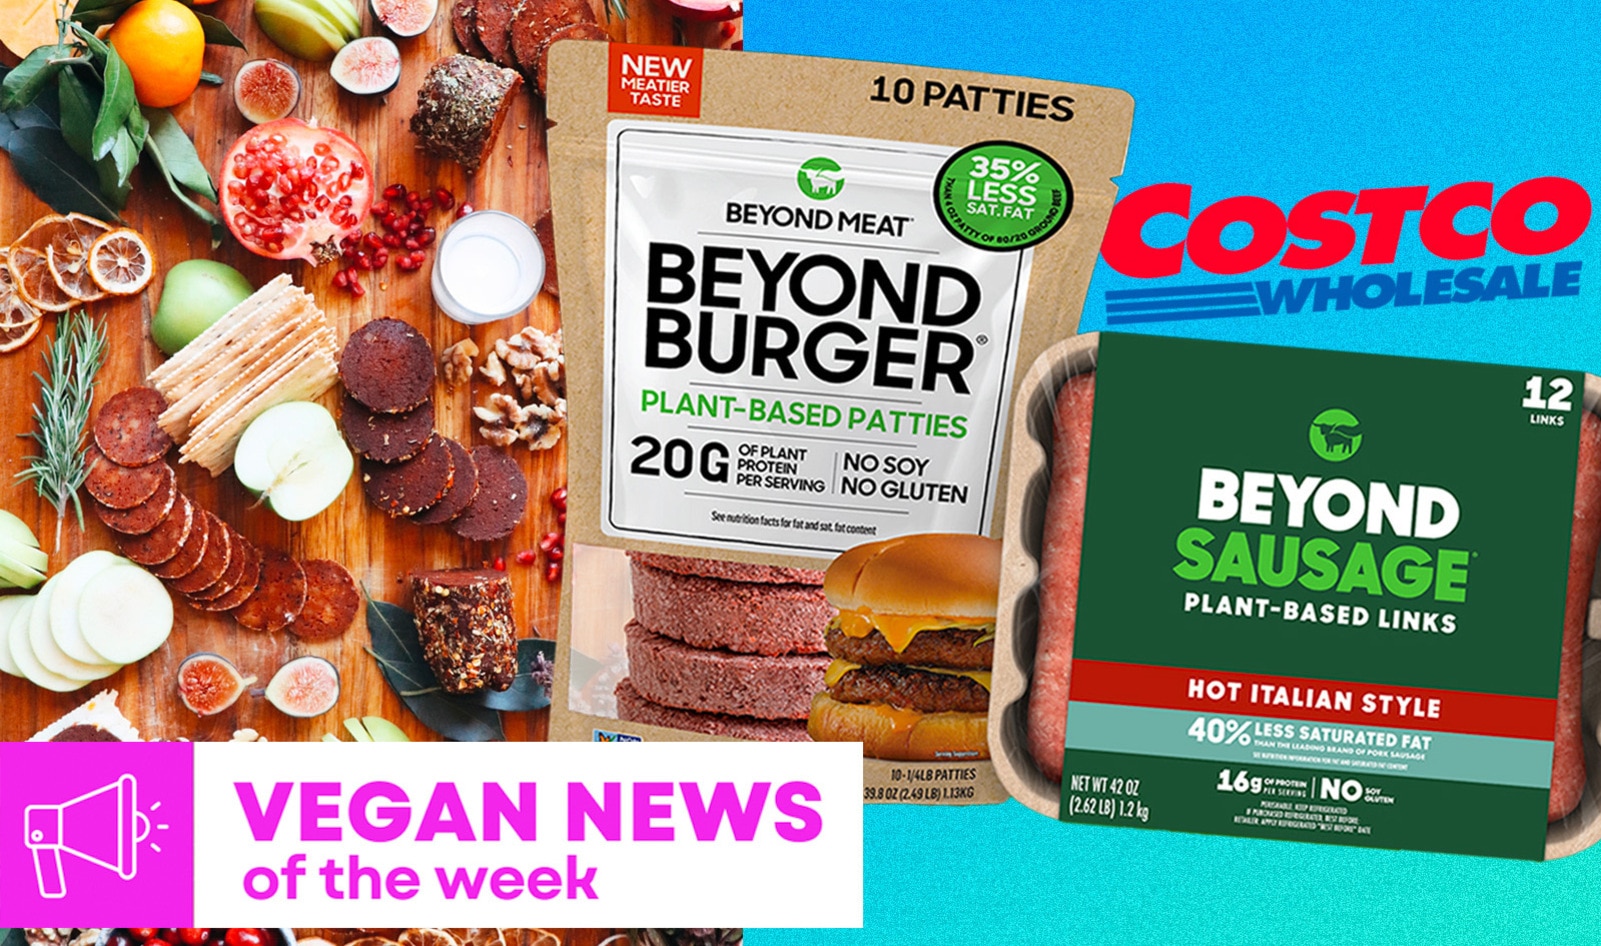 Vegan Food News of the Week: Costco's Grill-Ready Brats, Smoked Salami, and More